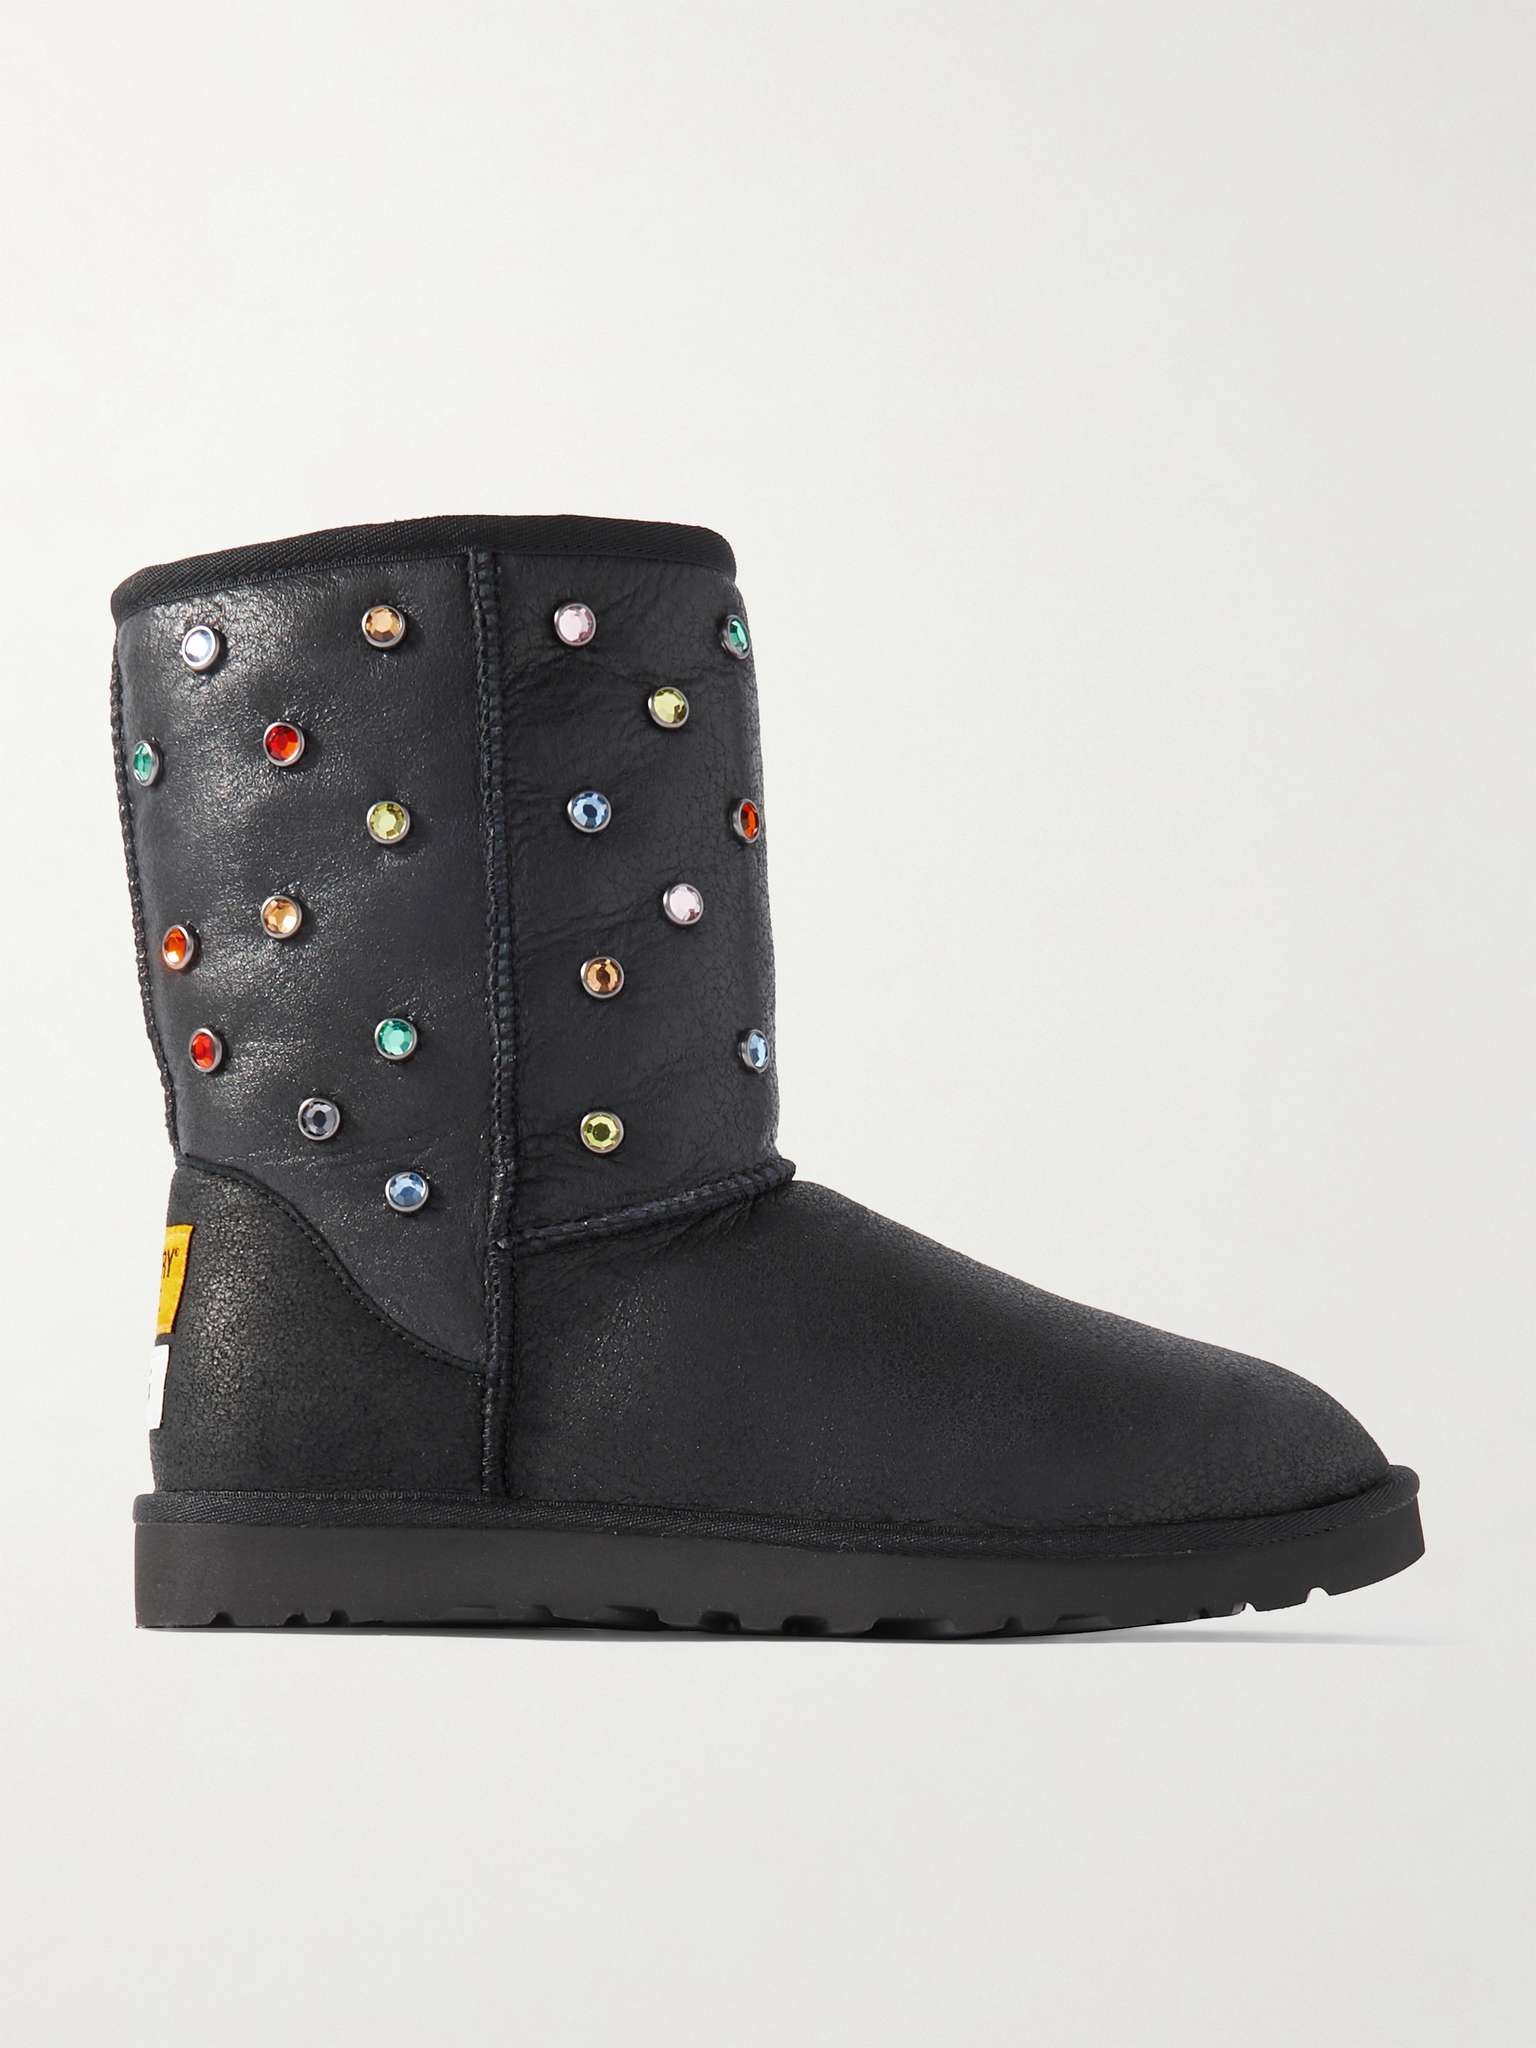 + Gallery Dept. Classic Short Regenerate Shearling-Lined Embellished Leather Boots - 1